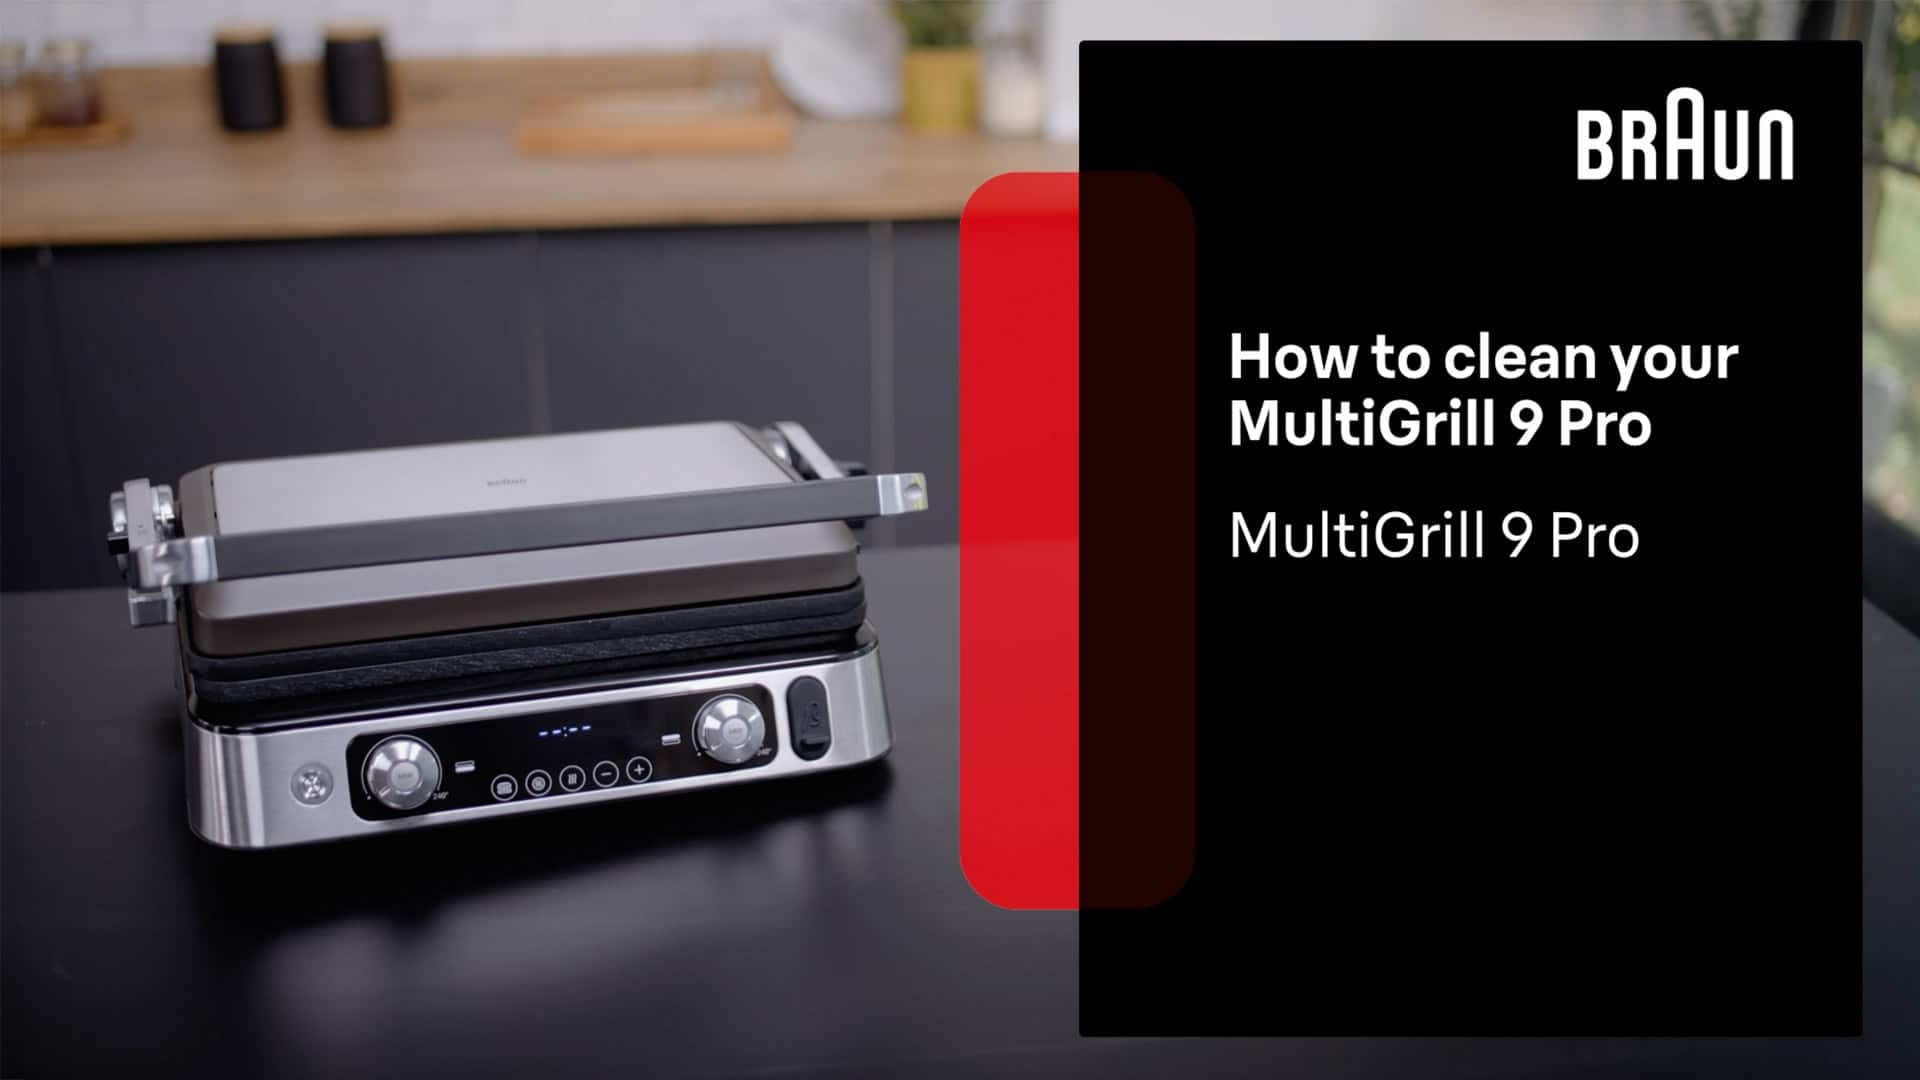 Braun MultiGrill 9 Pro | How to Clean Your Multigrill 9 Pro